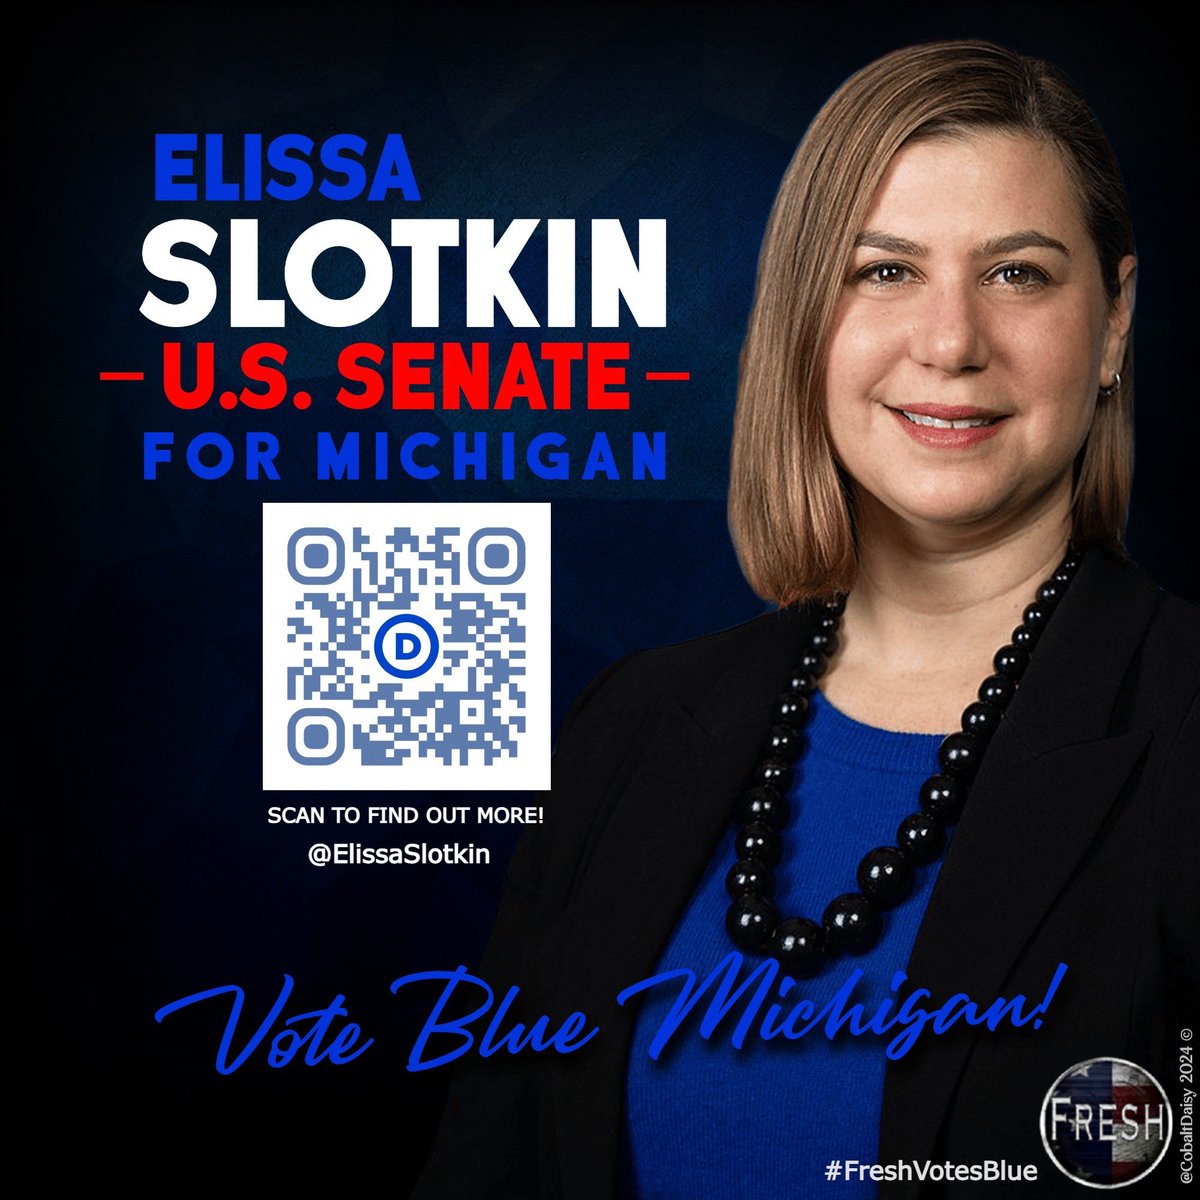 It is imperative that Democrats Hold the Senate to ensure Roe is codified, gun reform is passed, and voting rights are protected once President Biden is reelected!

Follow and Support @ElissaSlotkin for US Senate - Michigan.
#FreshUnity
#4MoreYears
#HoldTheSenate